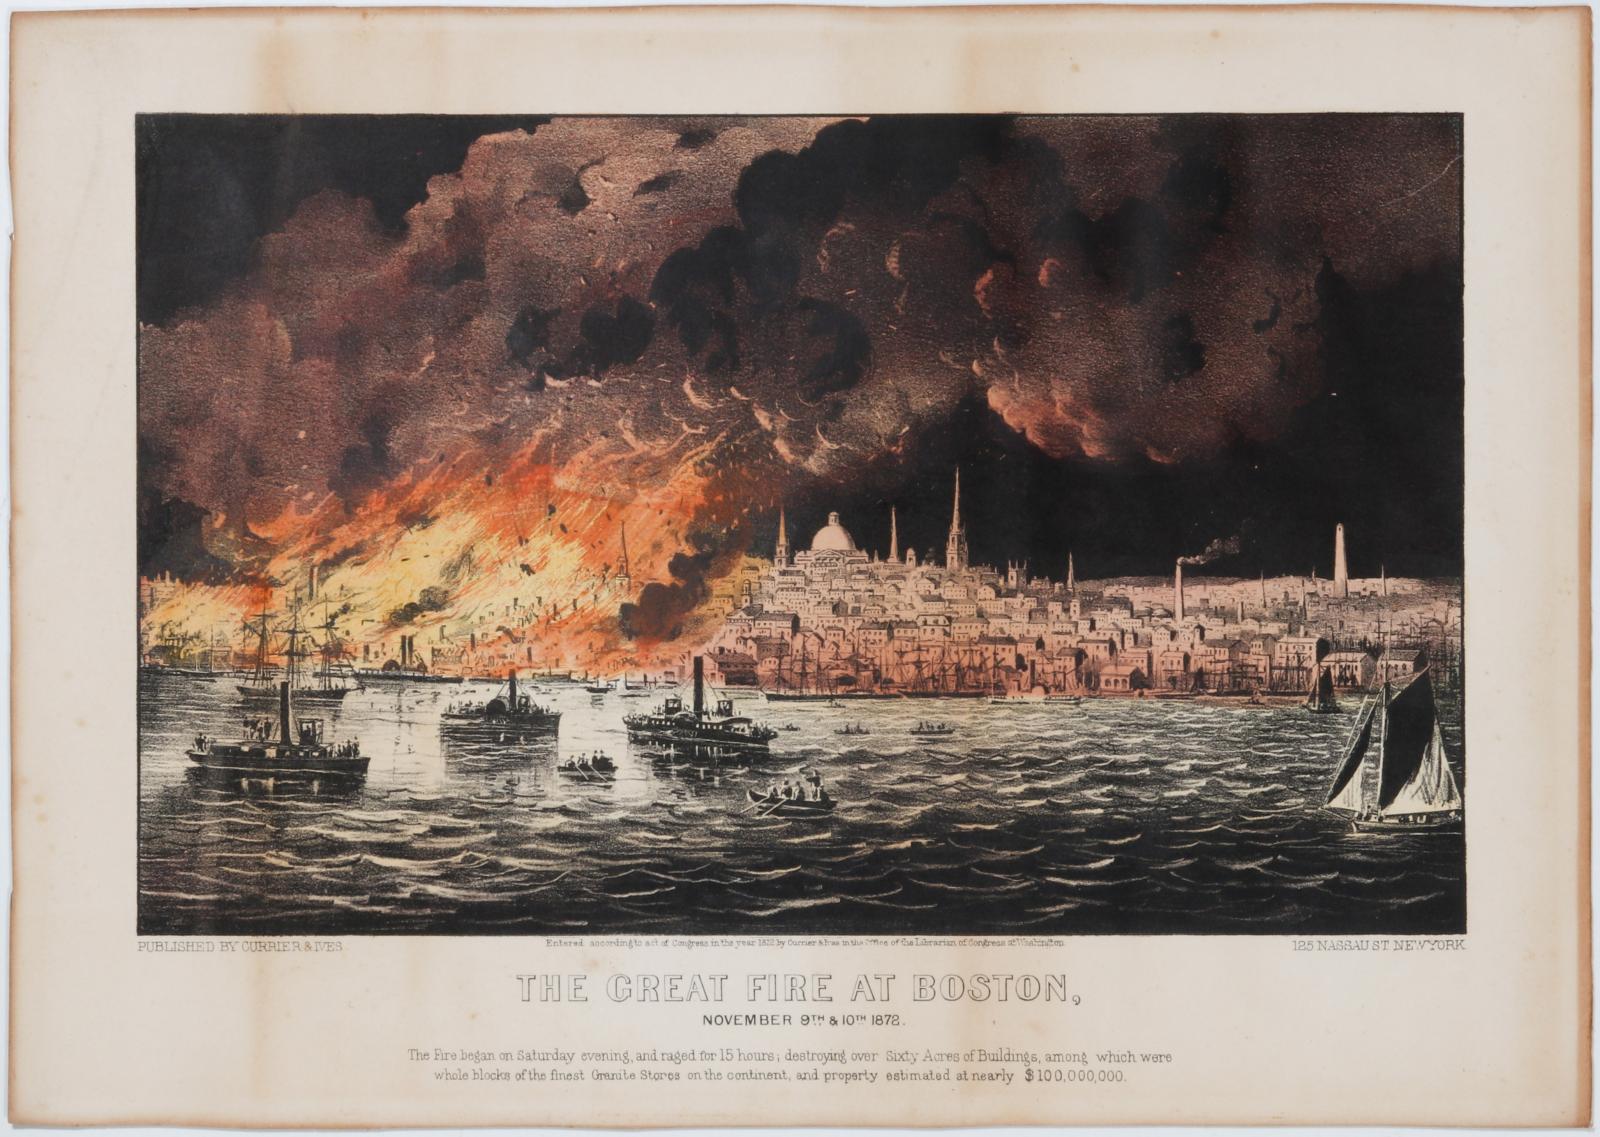 CURRIER AND IVES LITHO 'THE GREAT FIRE AT BOSTON'